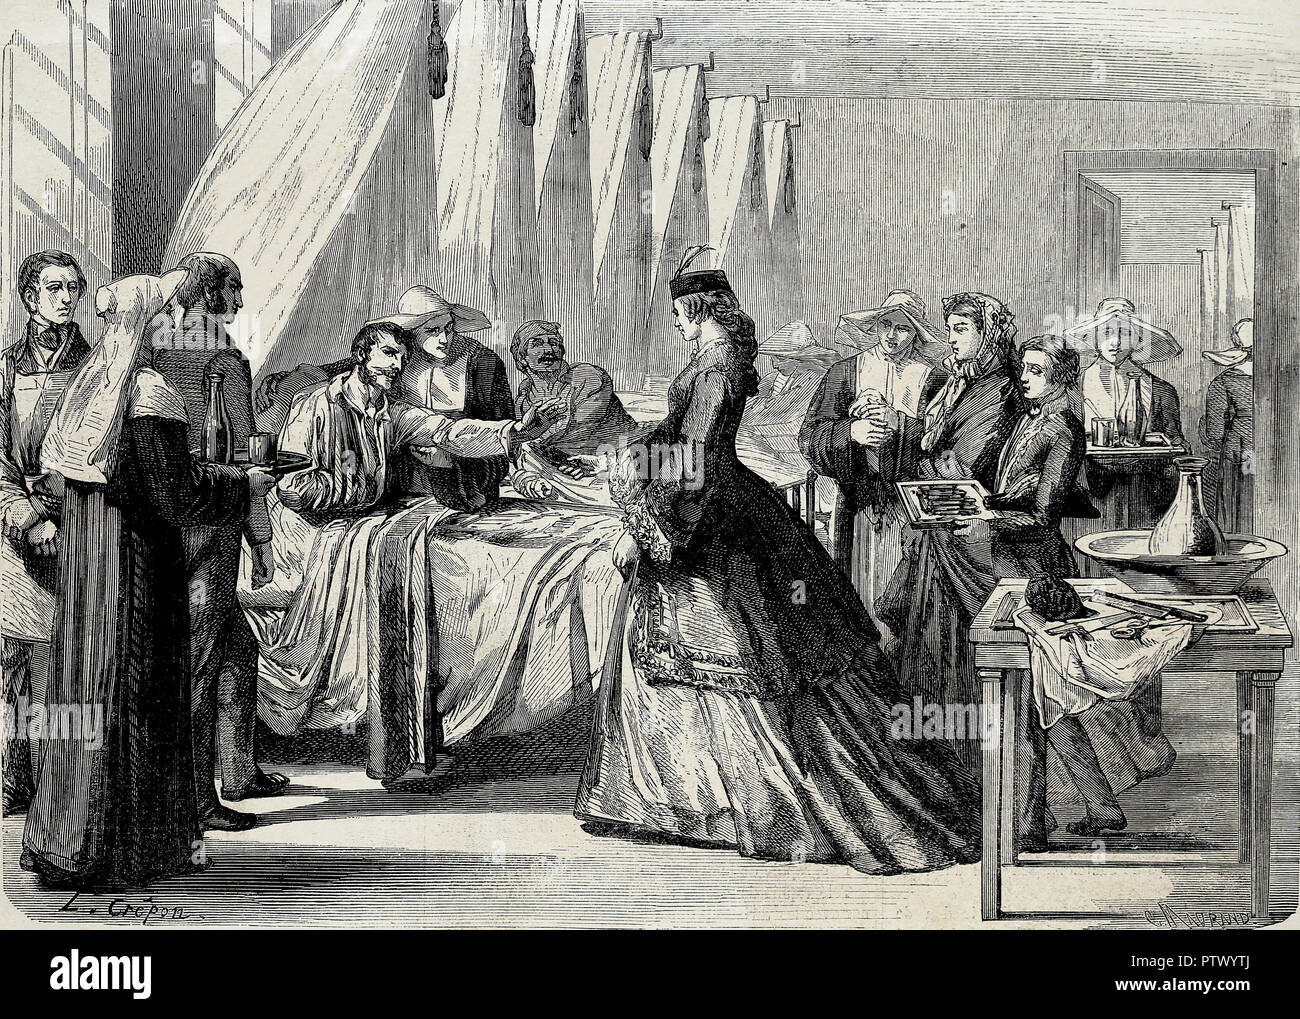 Empress Elisabeth of Austria (1873-1898), nicknamed Sisi, visiting wounded soldiers in a hospital. Line engraving. Stock Photo